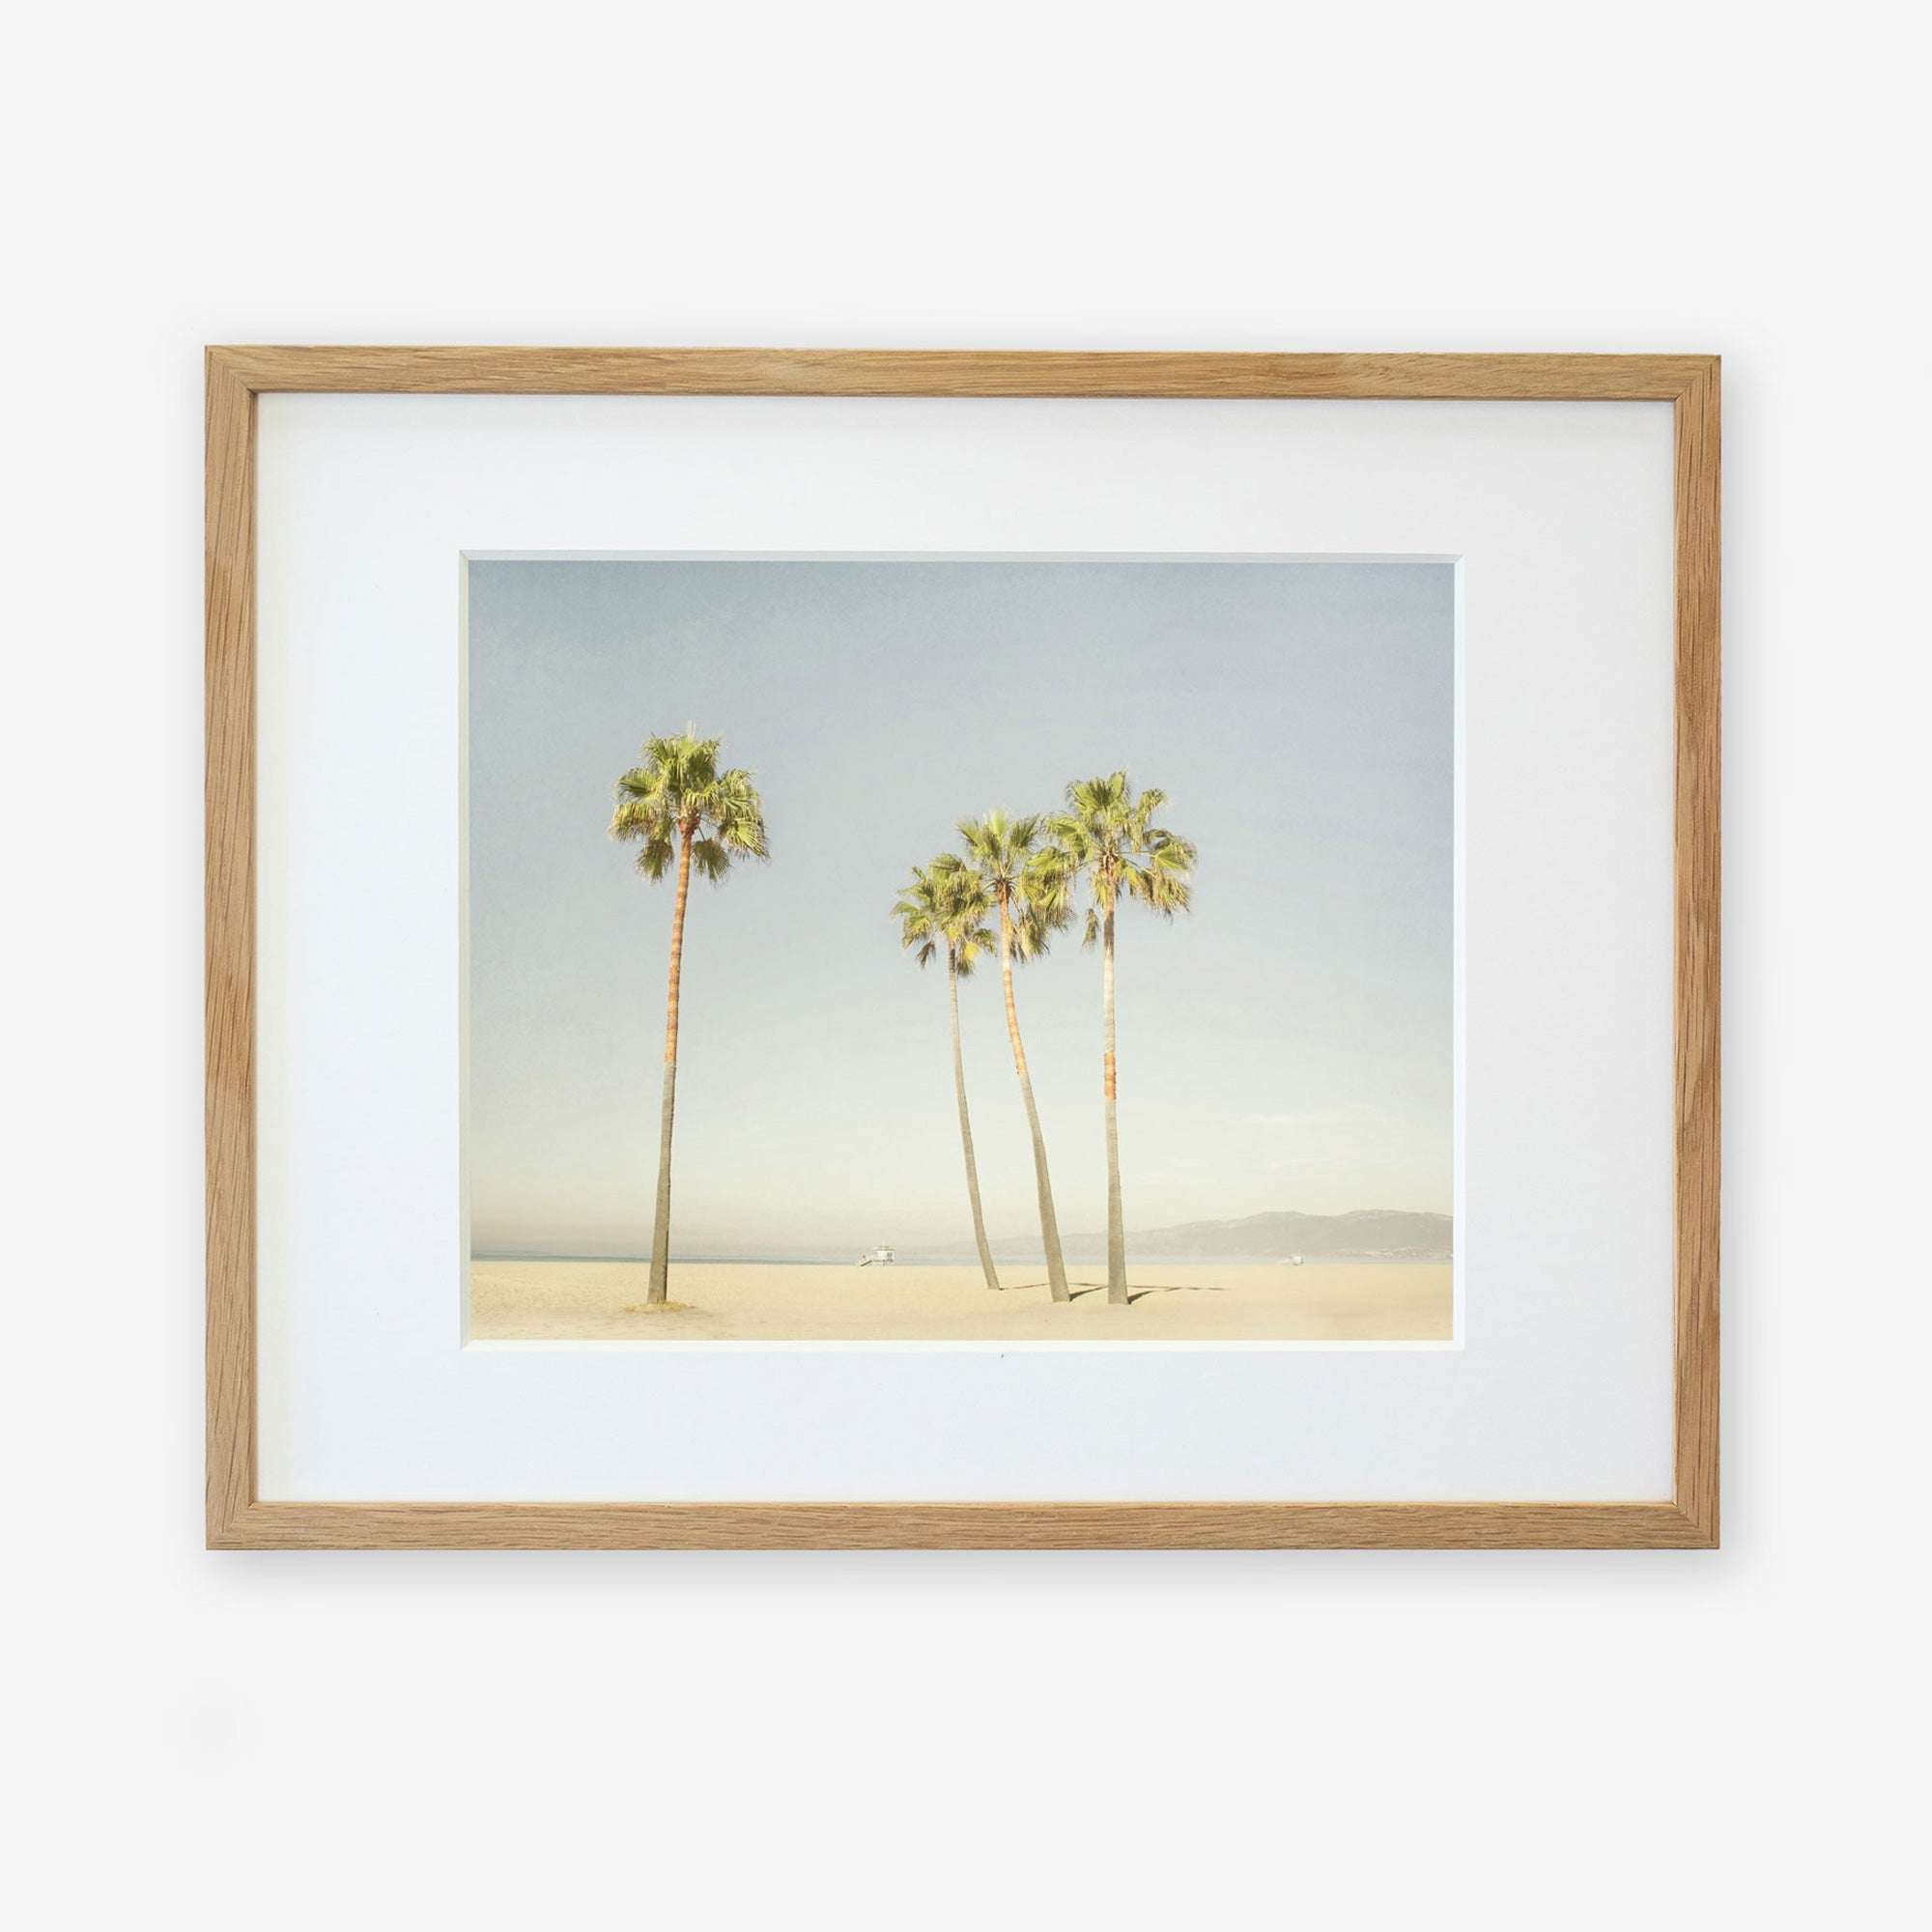 An unframed California Beach Palm Tree Print of five tall palm trees on a sandy beach under a clear sky, printed on archival photographic paper by Offley Green.